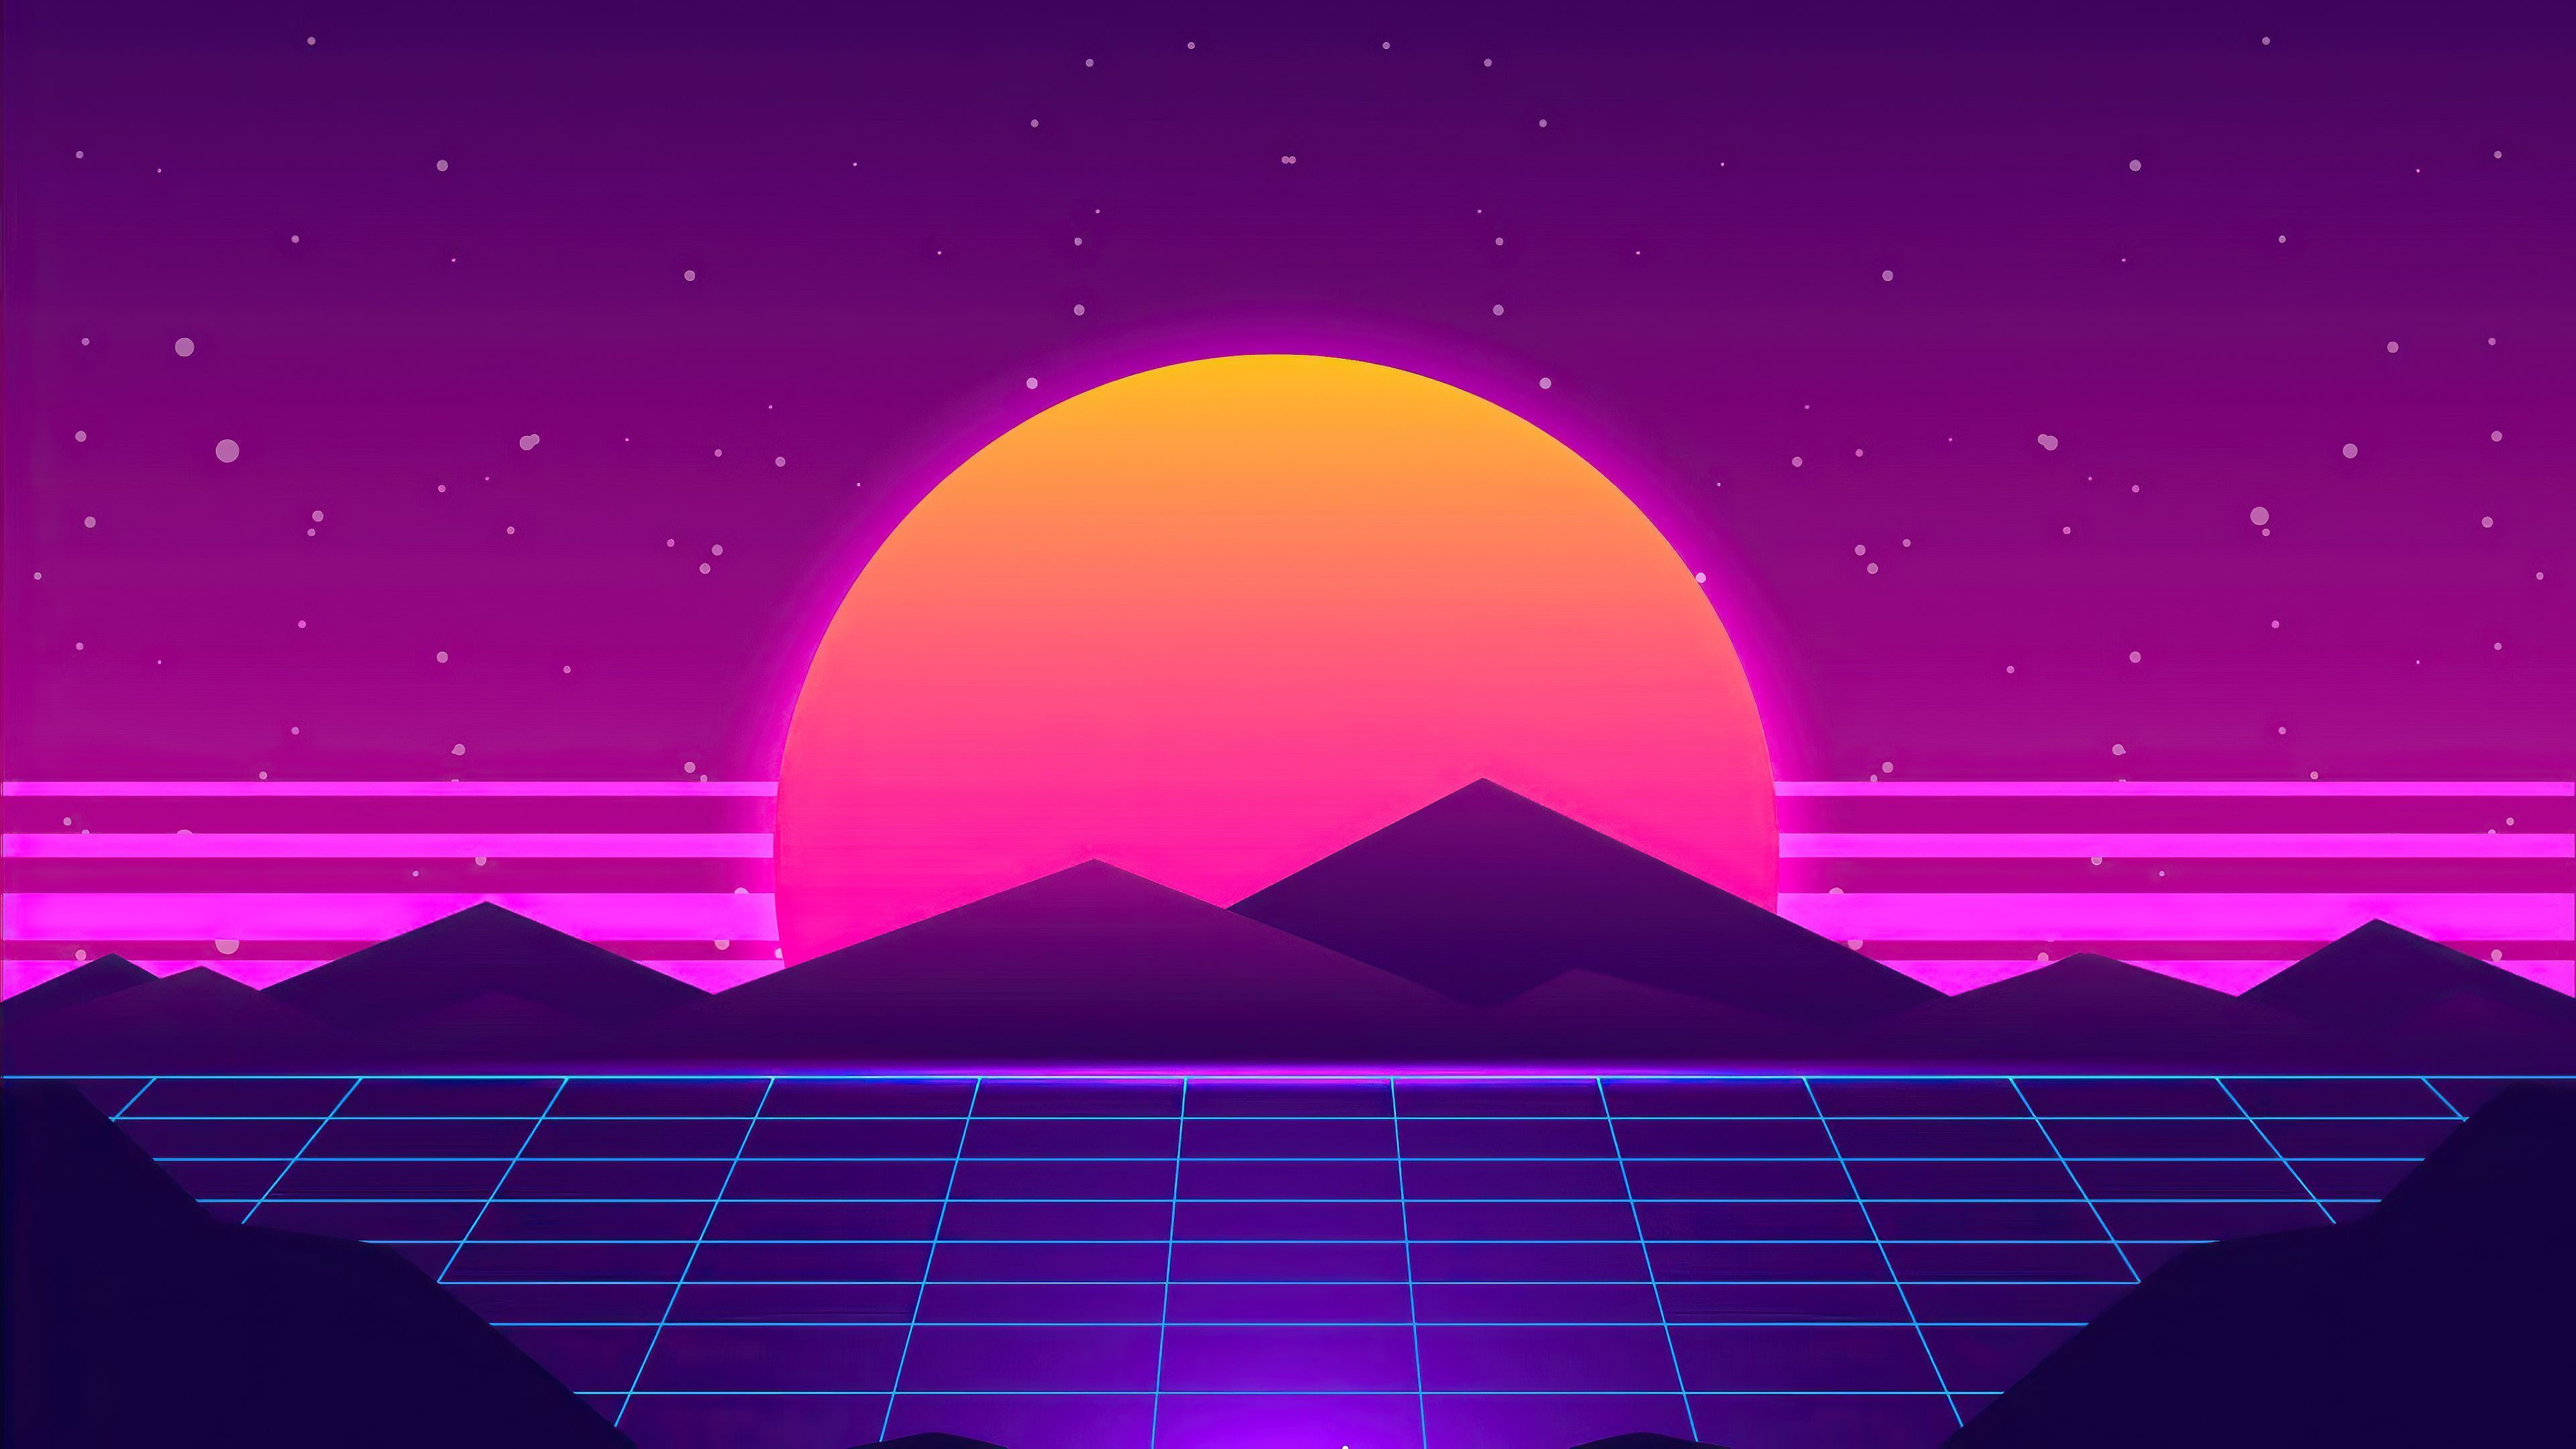 A retro style sunset with mountains and purple sky - Synthwave